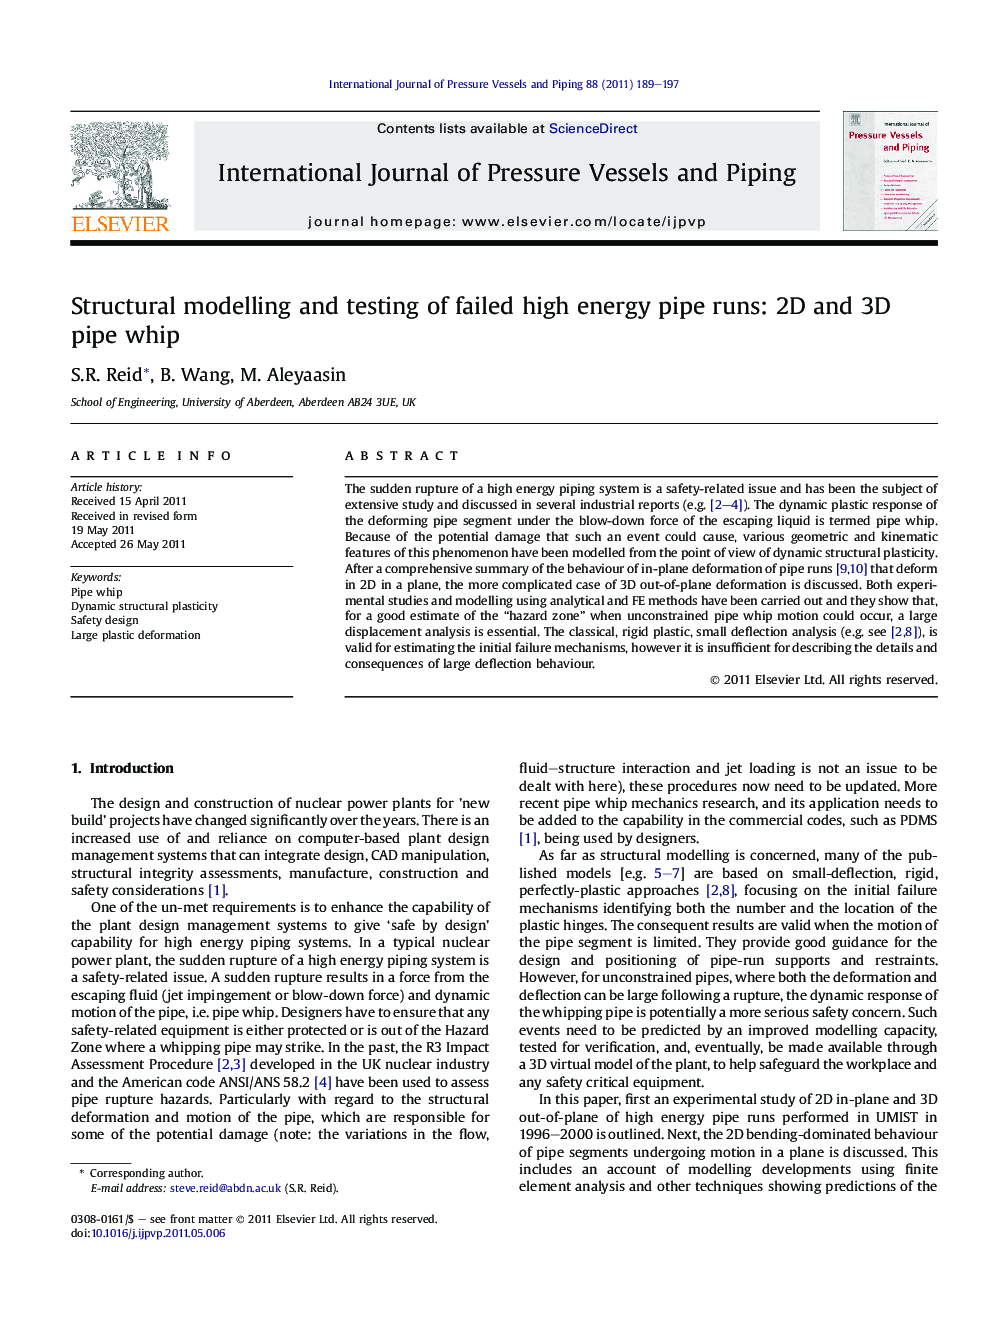 Structural modelling and testing of failed high energy pipe runs: 2D and 3D pipe whip